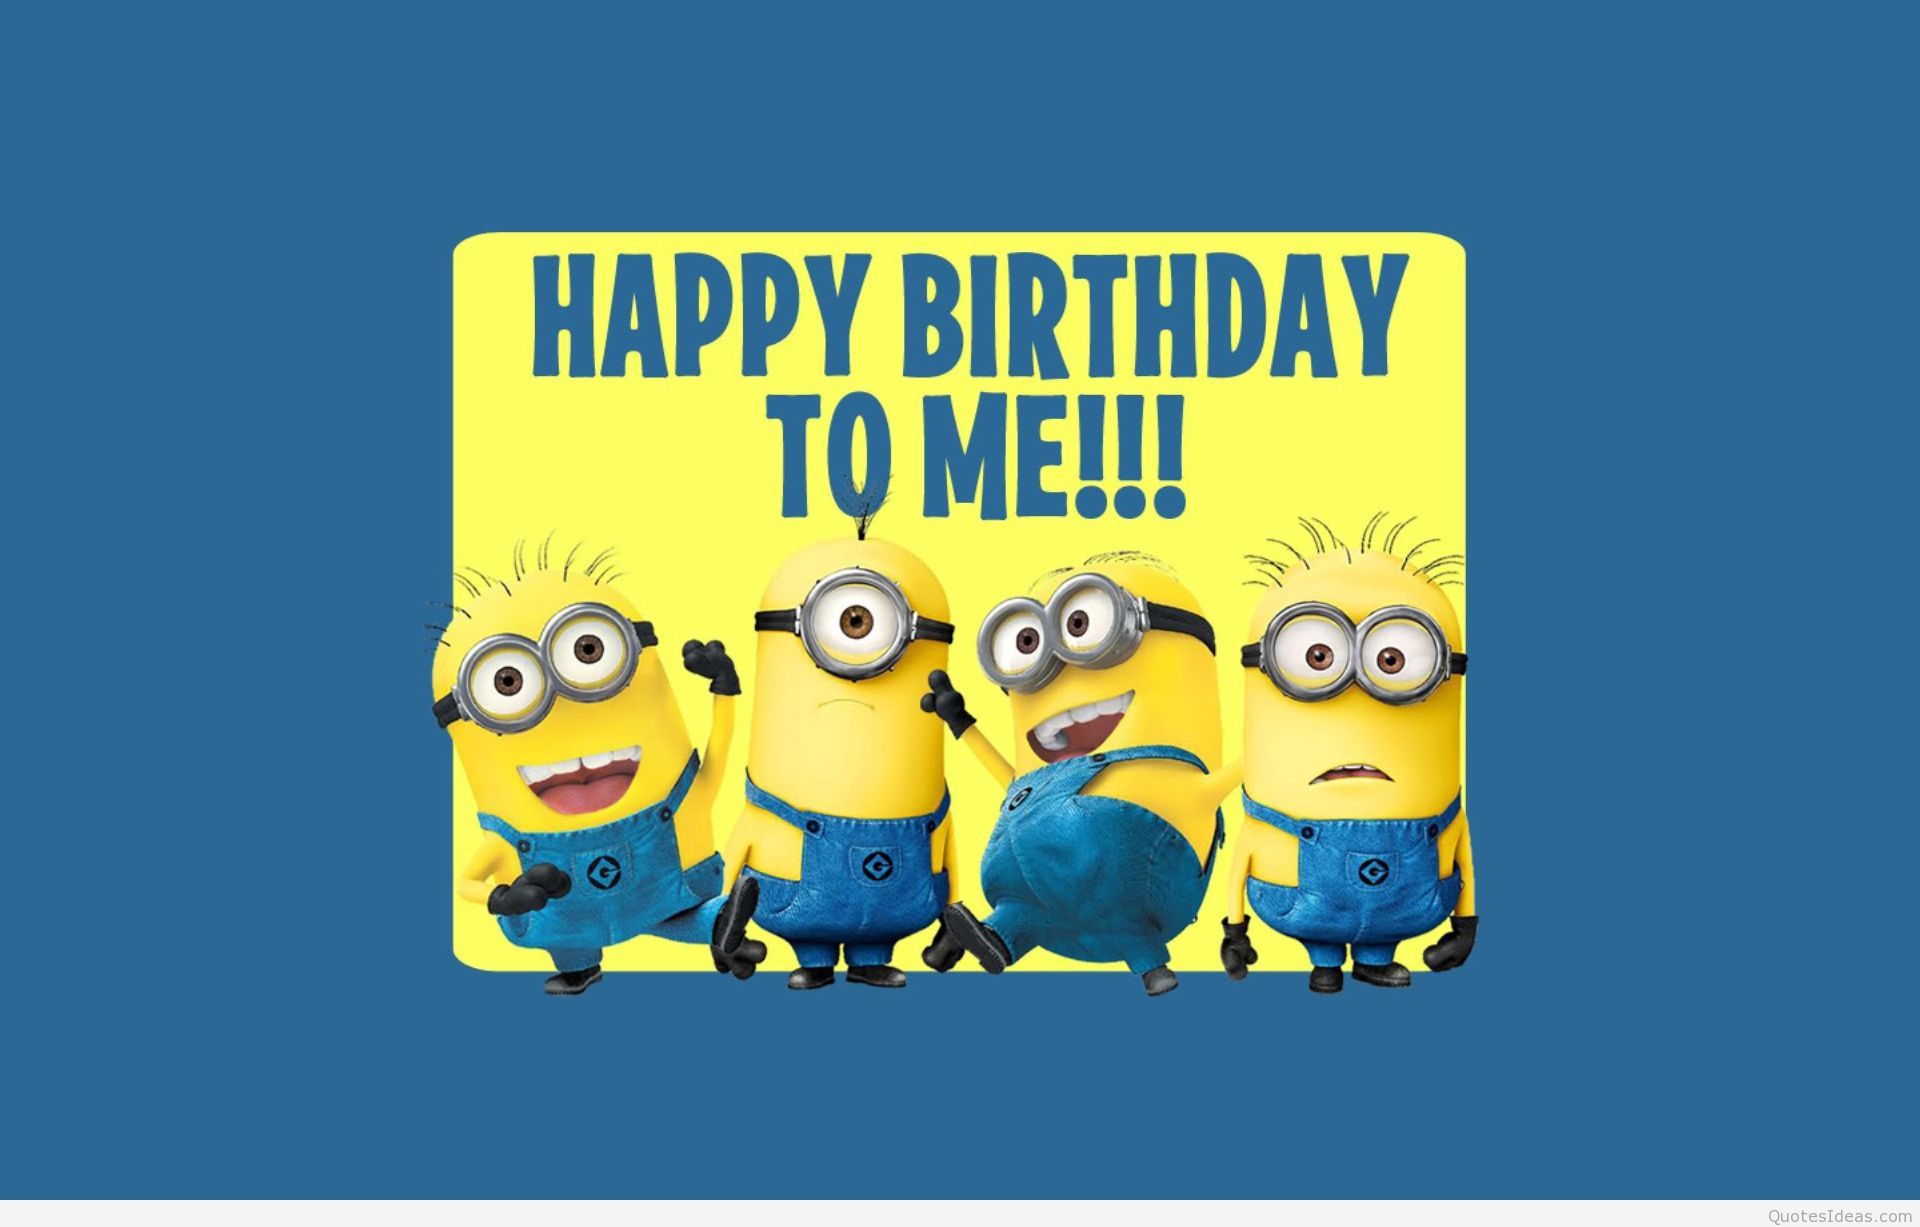 Minions background quotes and image